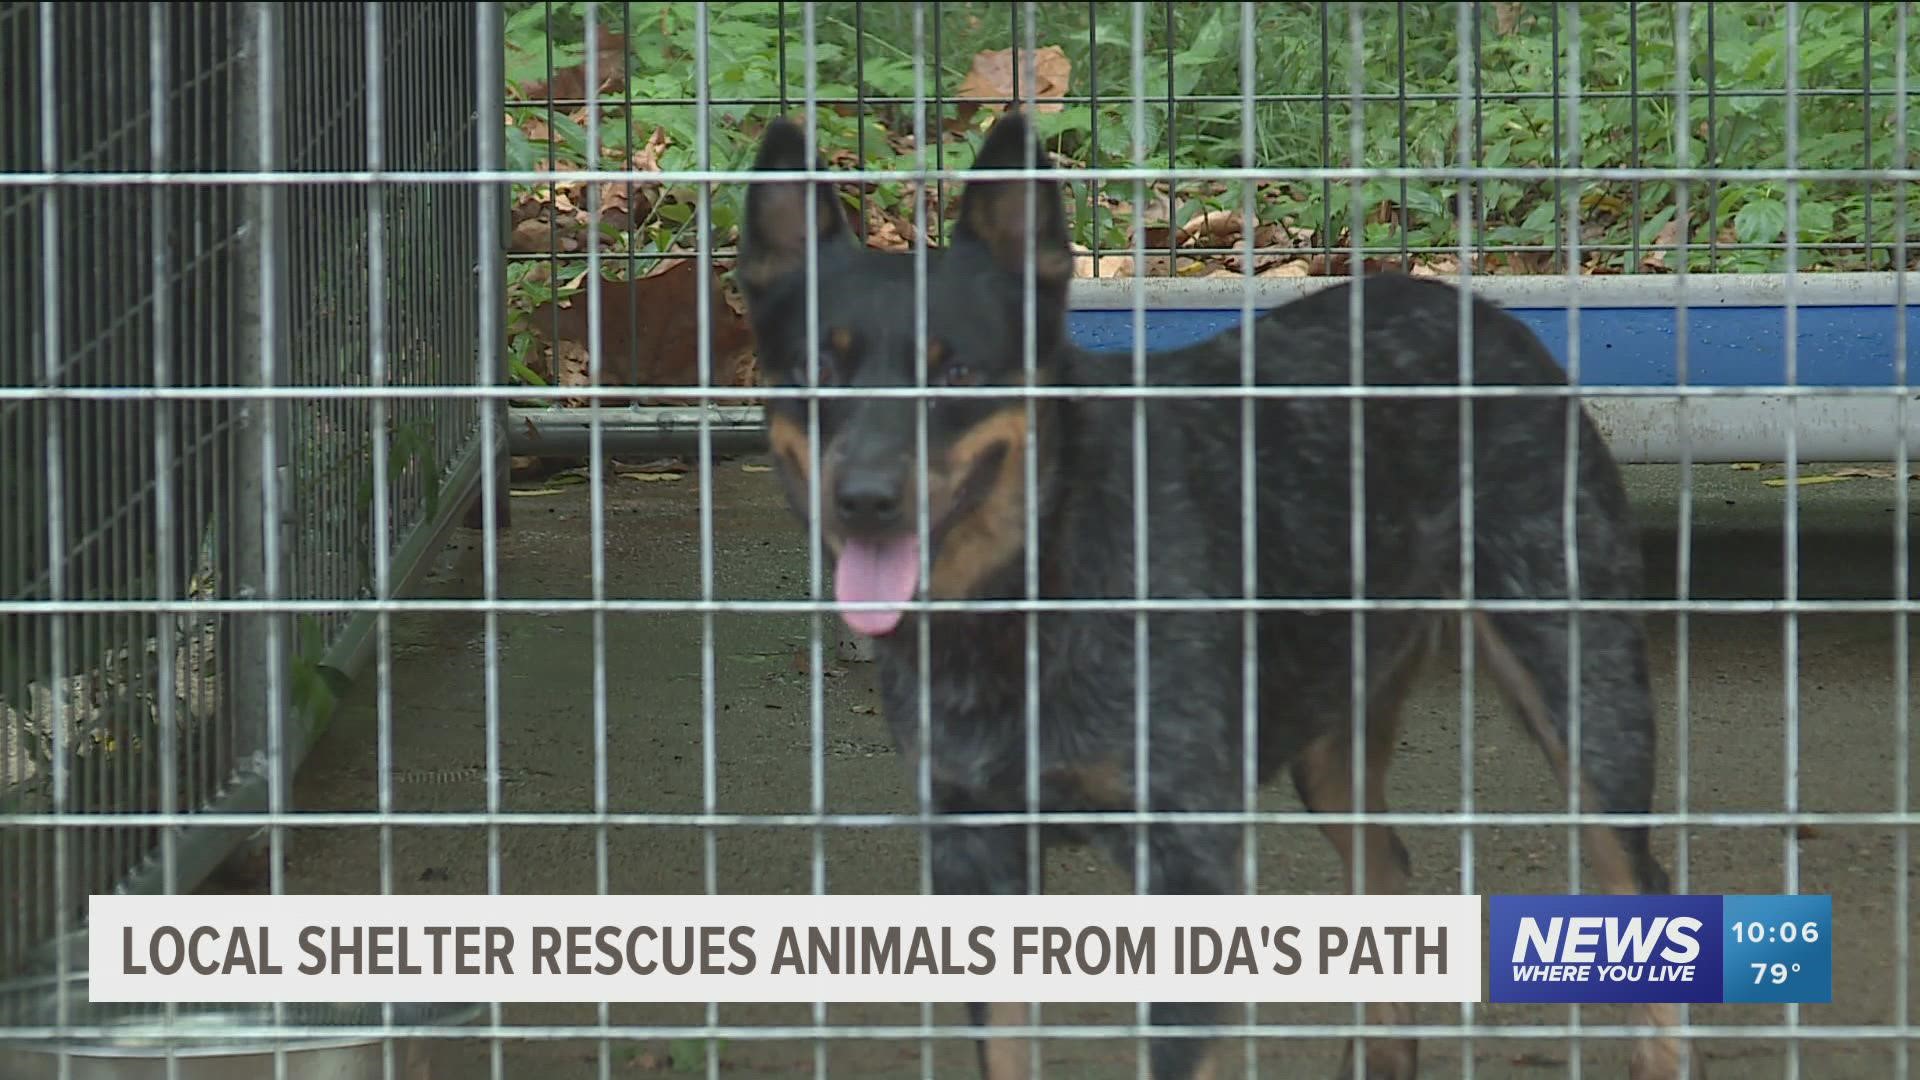 Needy Paws Animal Rescue Drove 17 hours to rescue Louisiana shelter dogs hours before Ida made landfall.